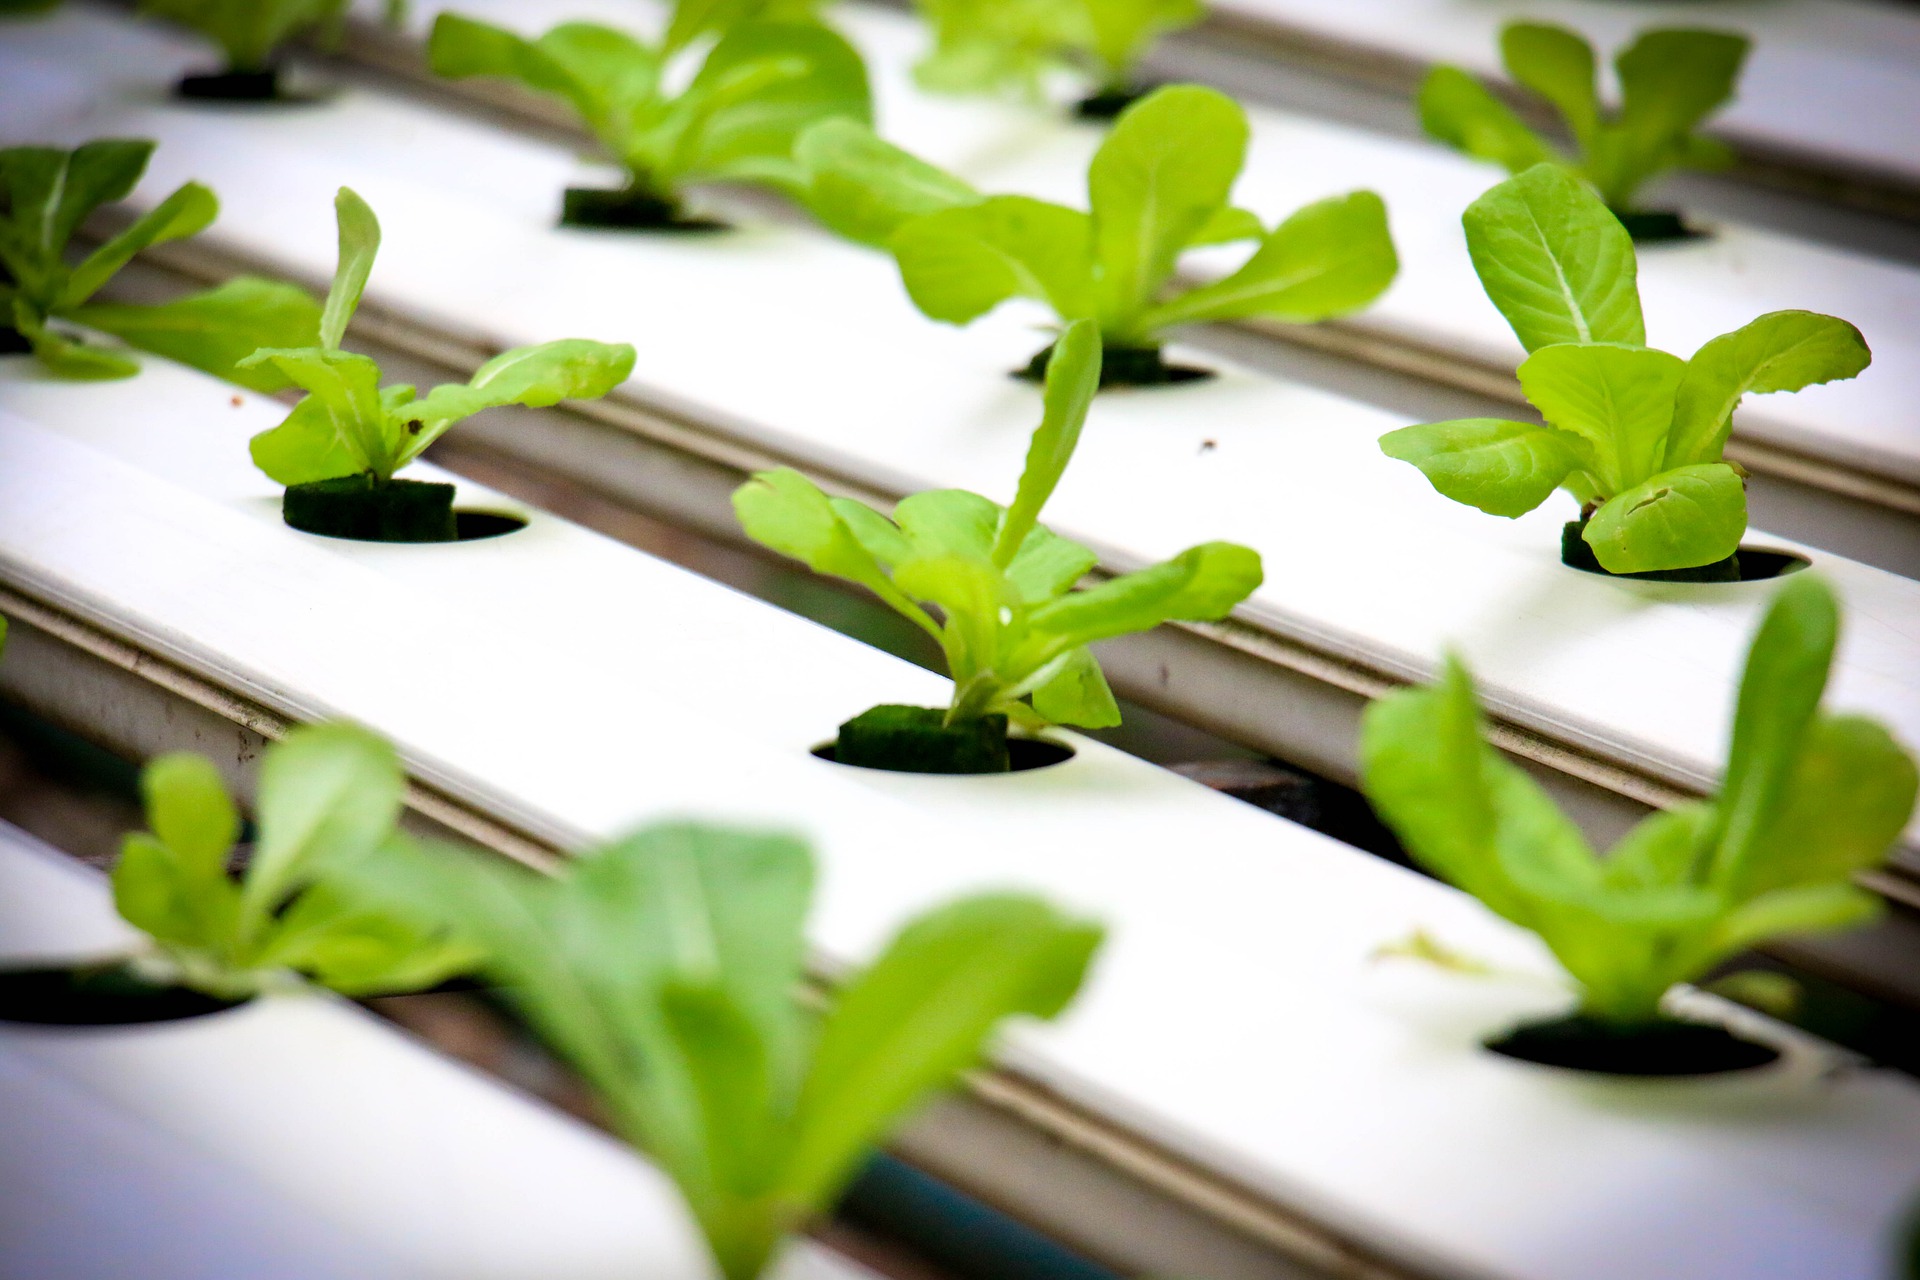 Hydroponics - what does it entail and how to start?